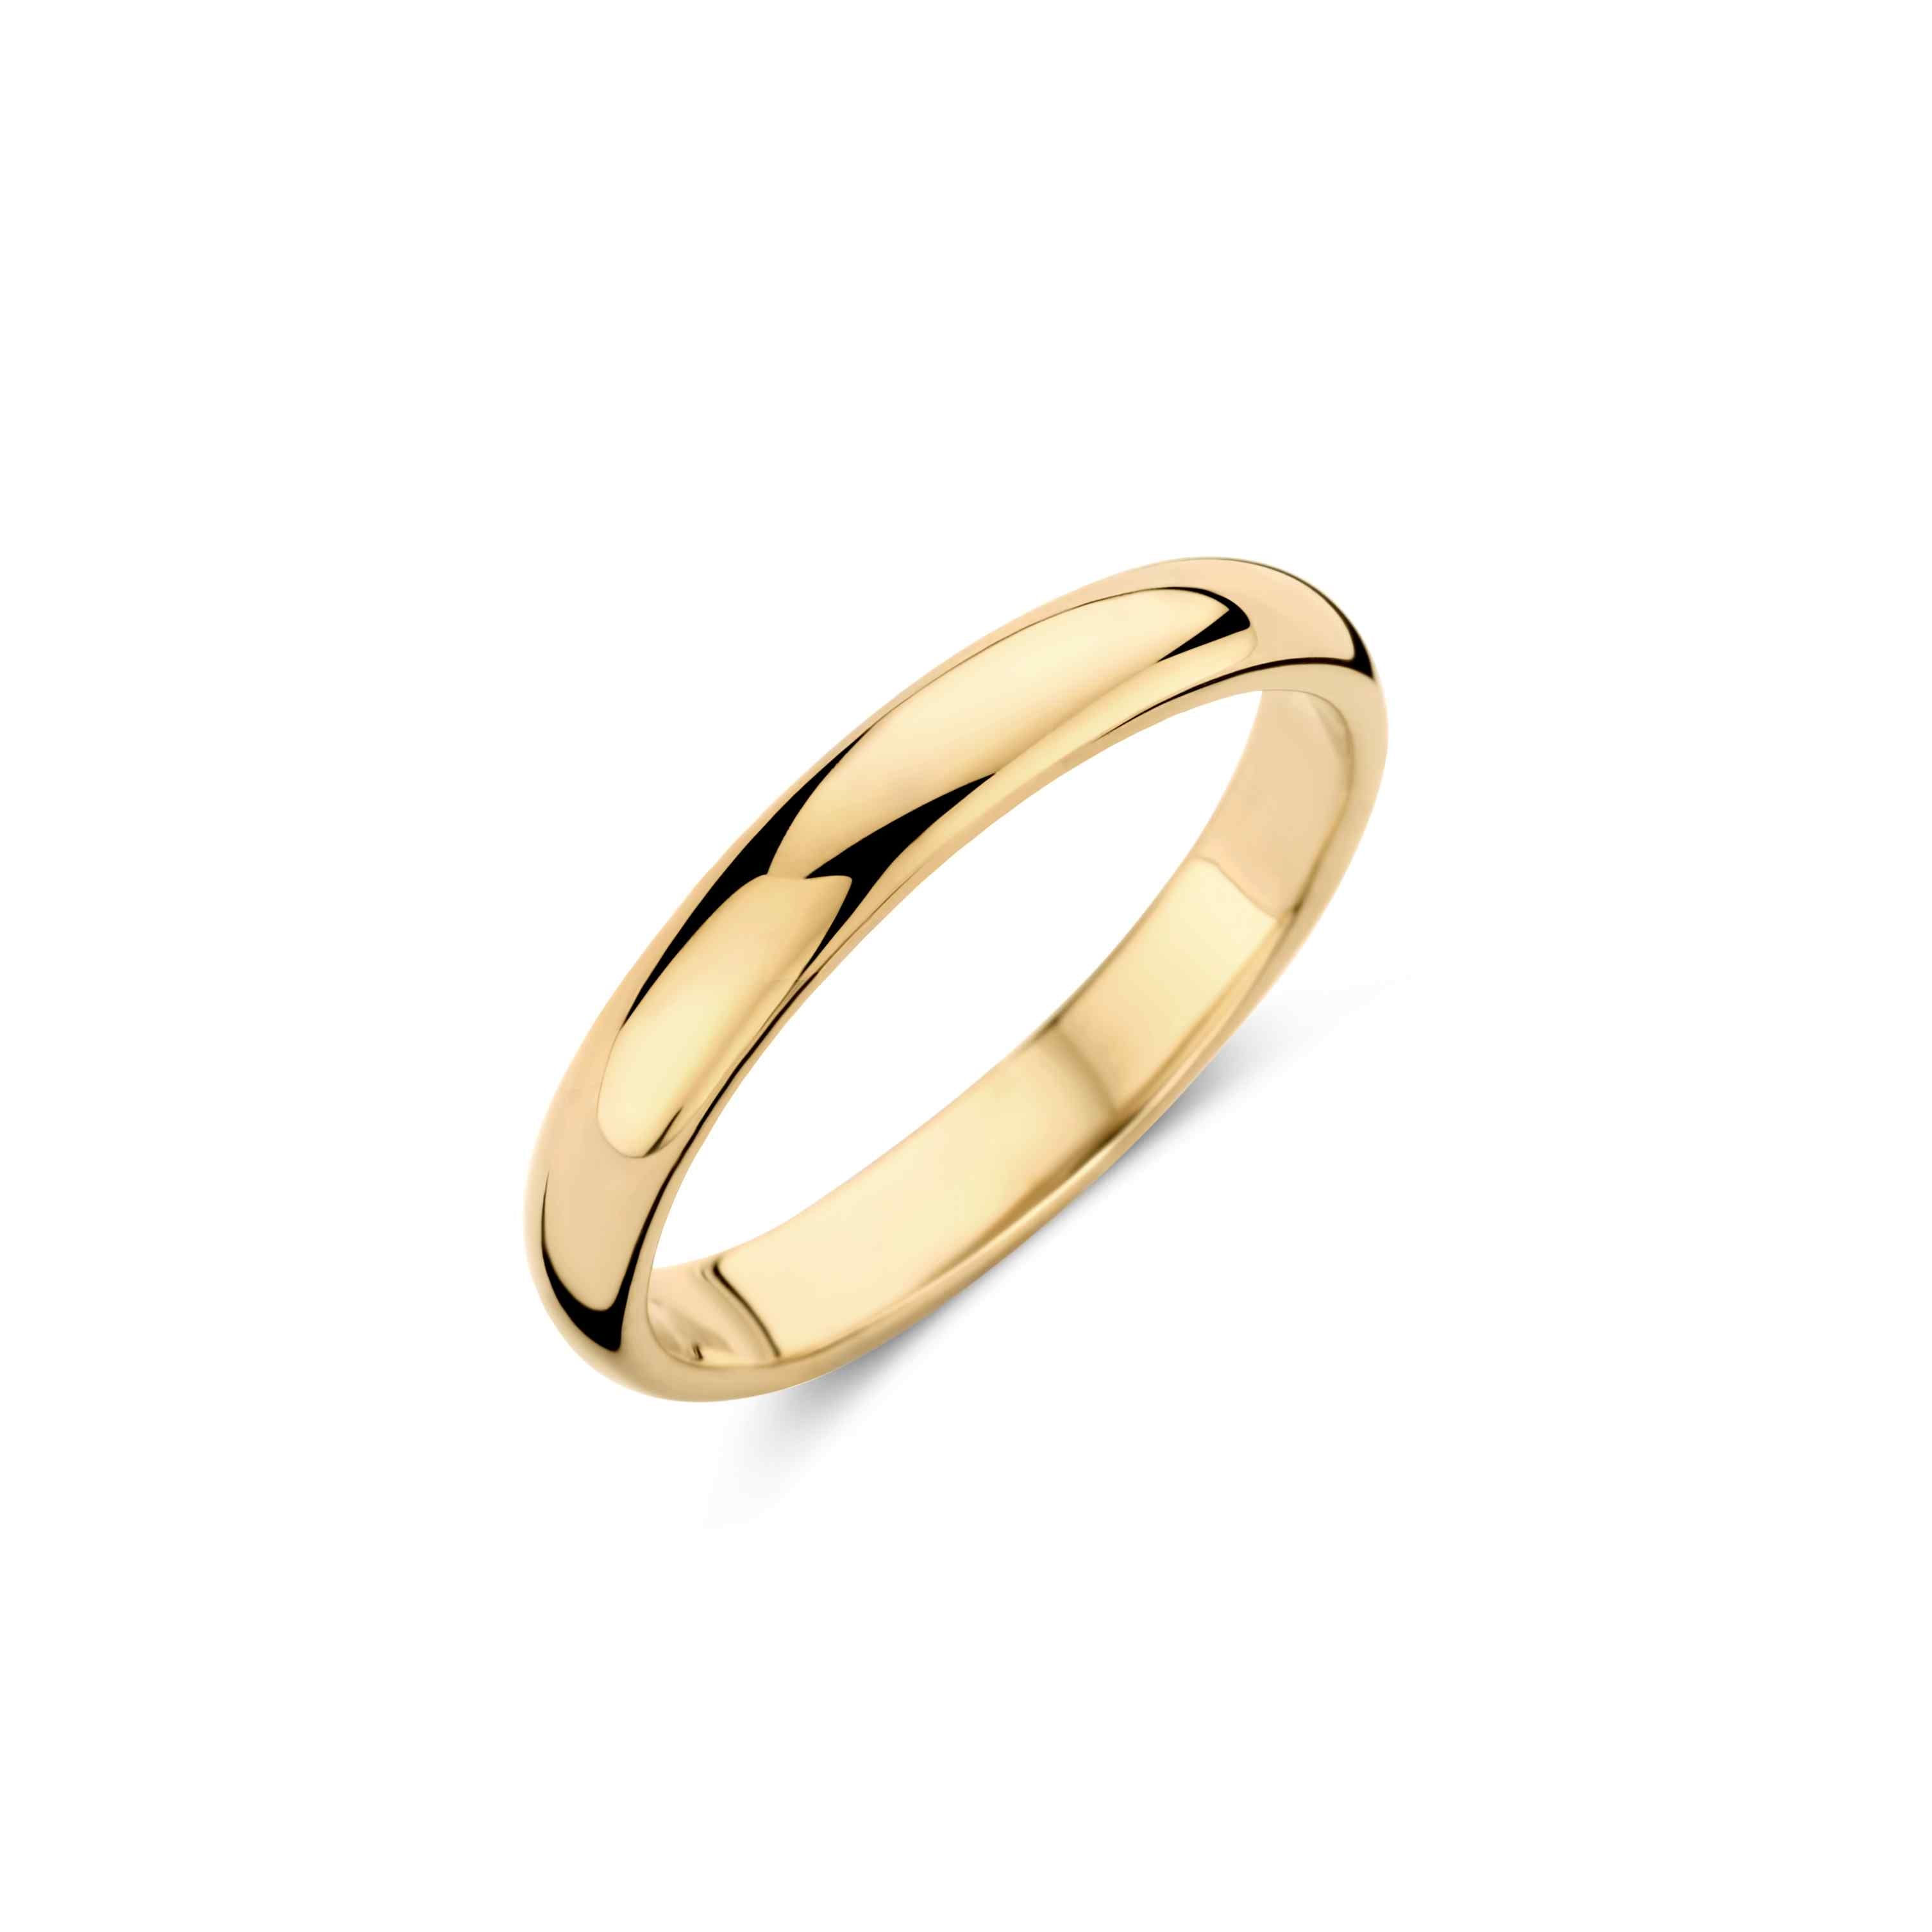 18K Yellow Gold band - perfect as a simple wedding band for both men and women. Recycled 18K Gold.